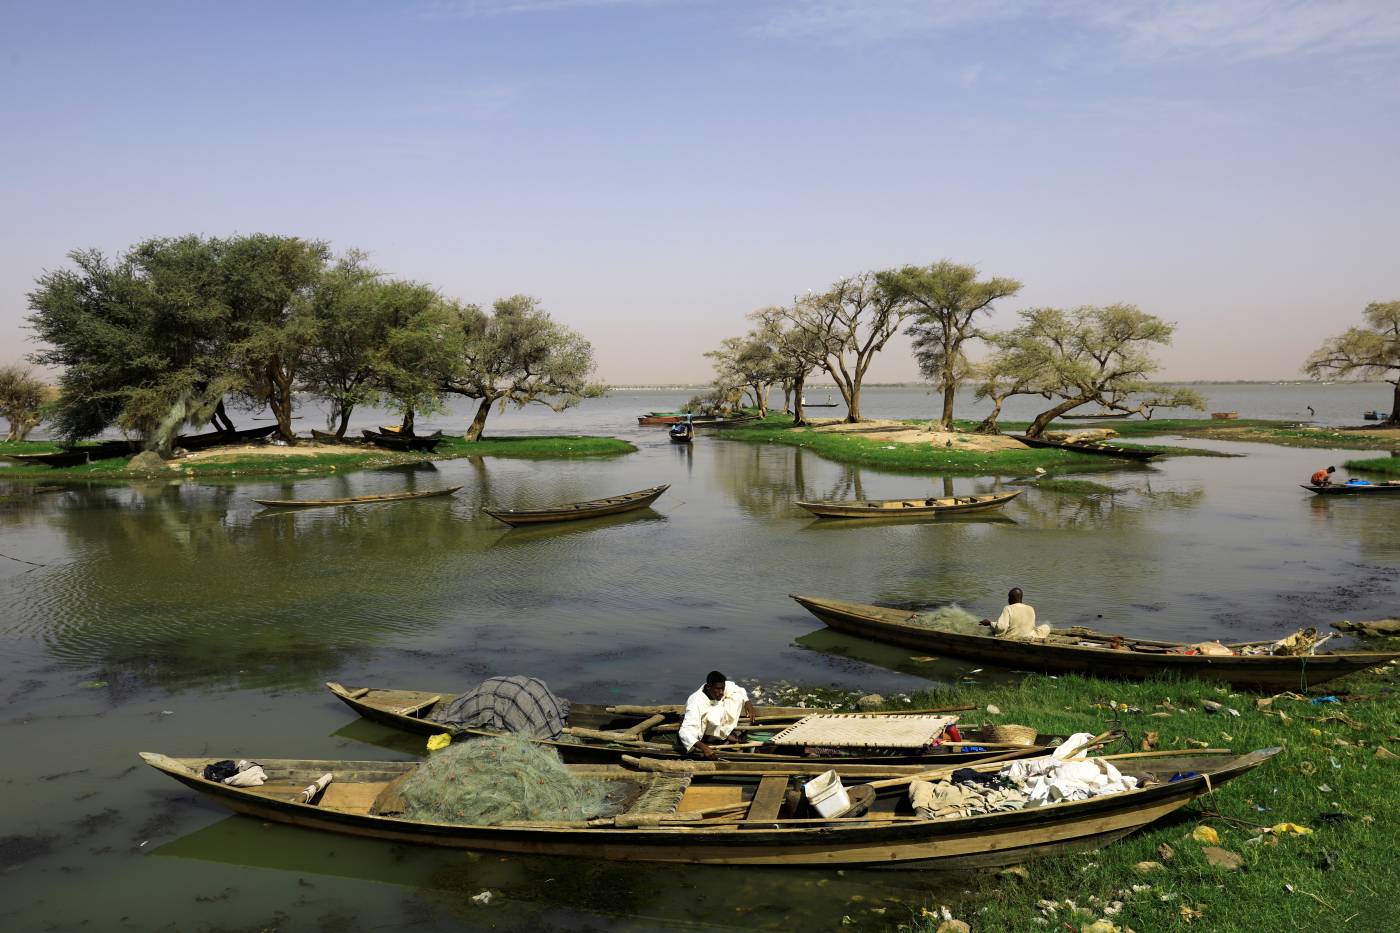 More people, less water? Scientists see risks on upper Nile